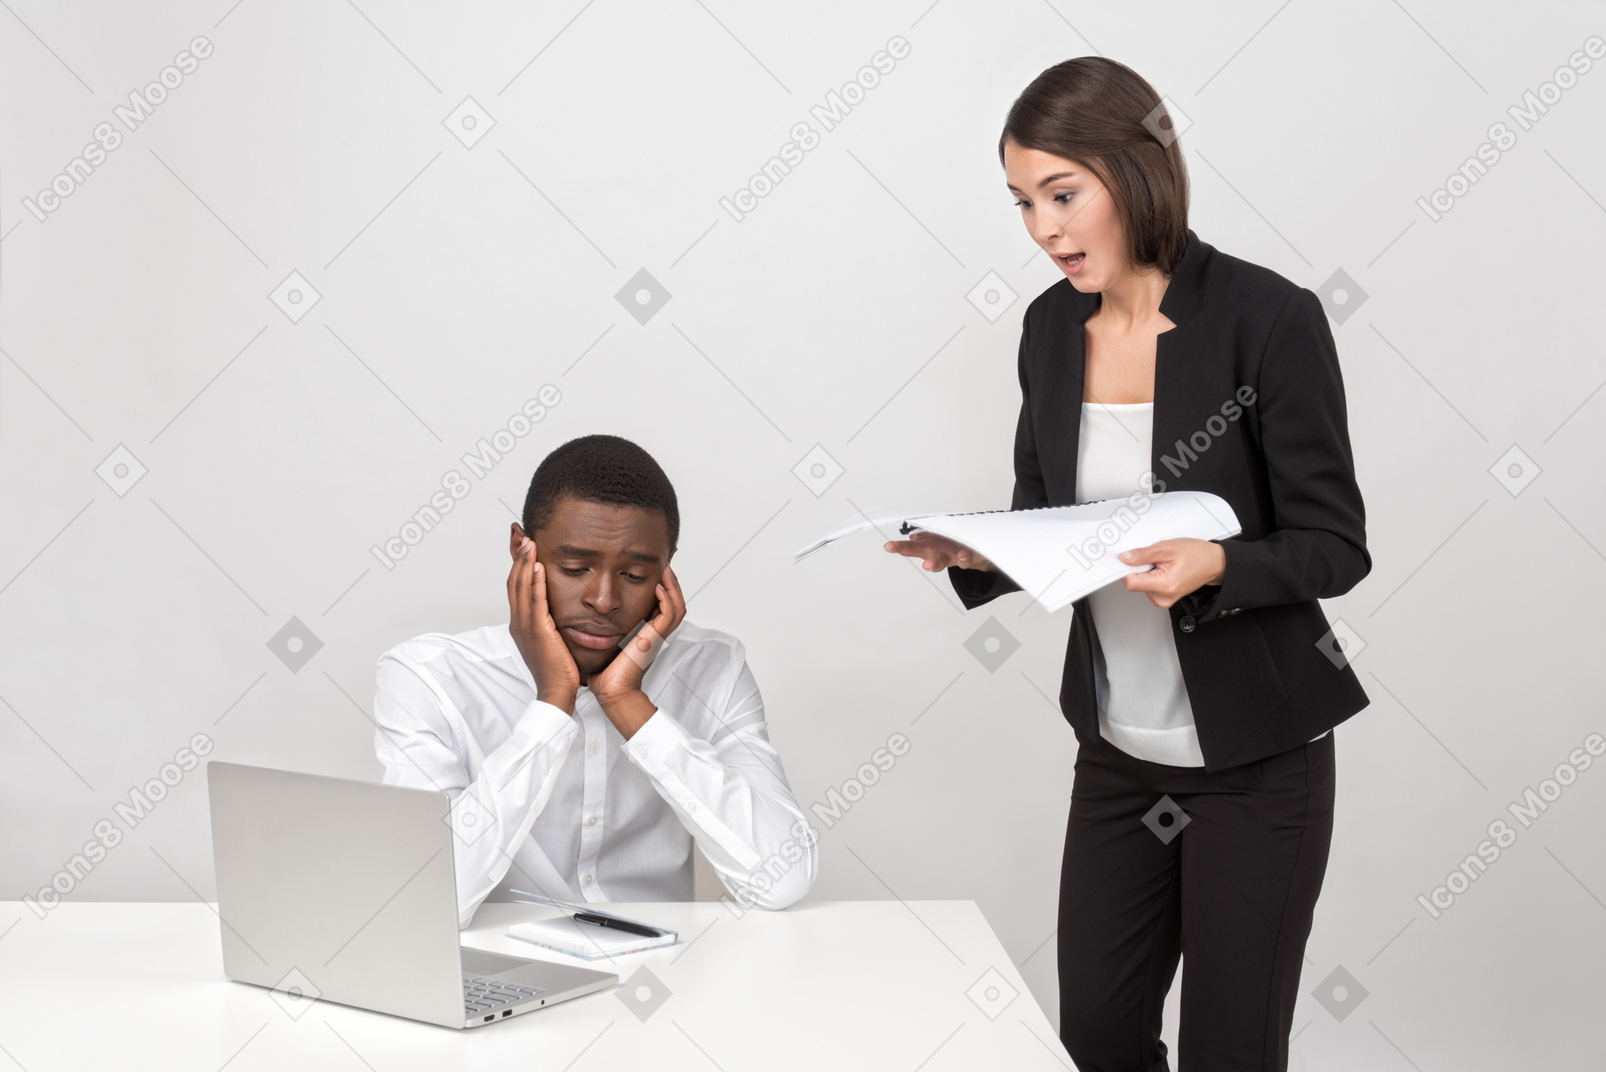 Angry female boss and her upset employee